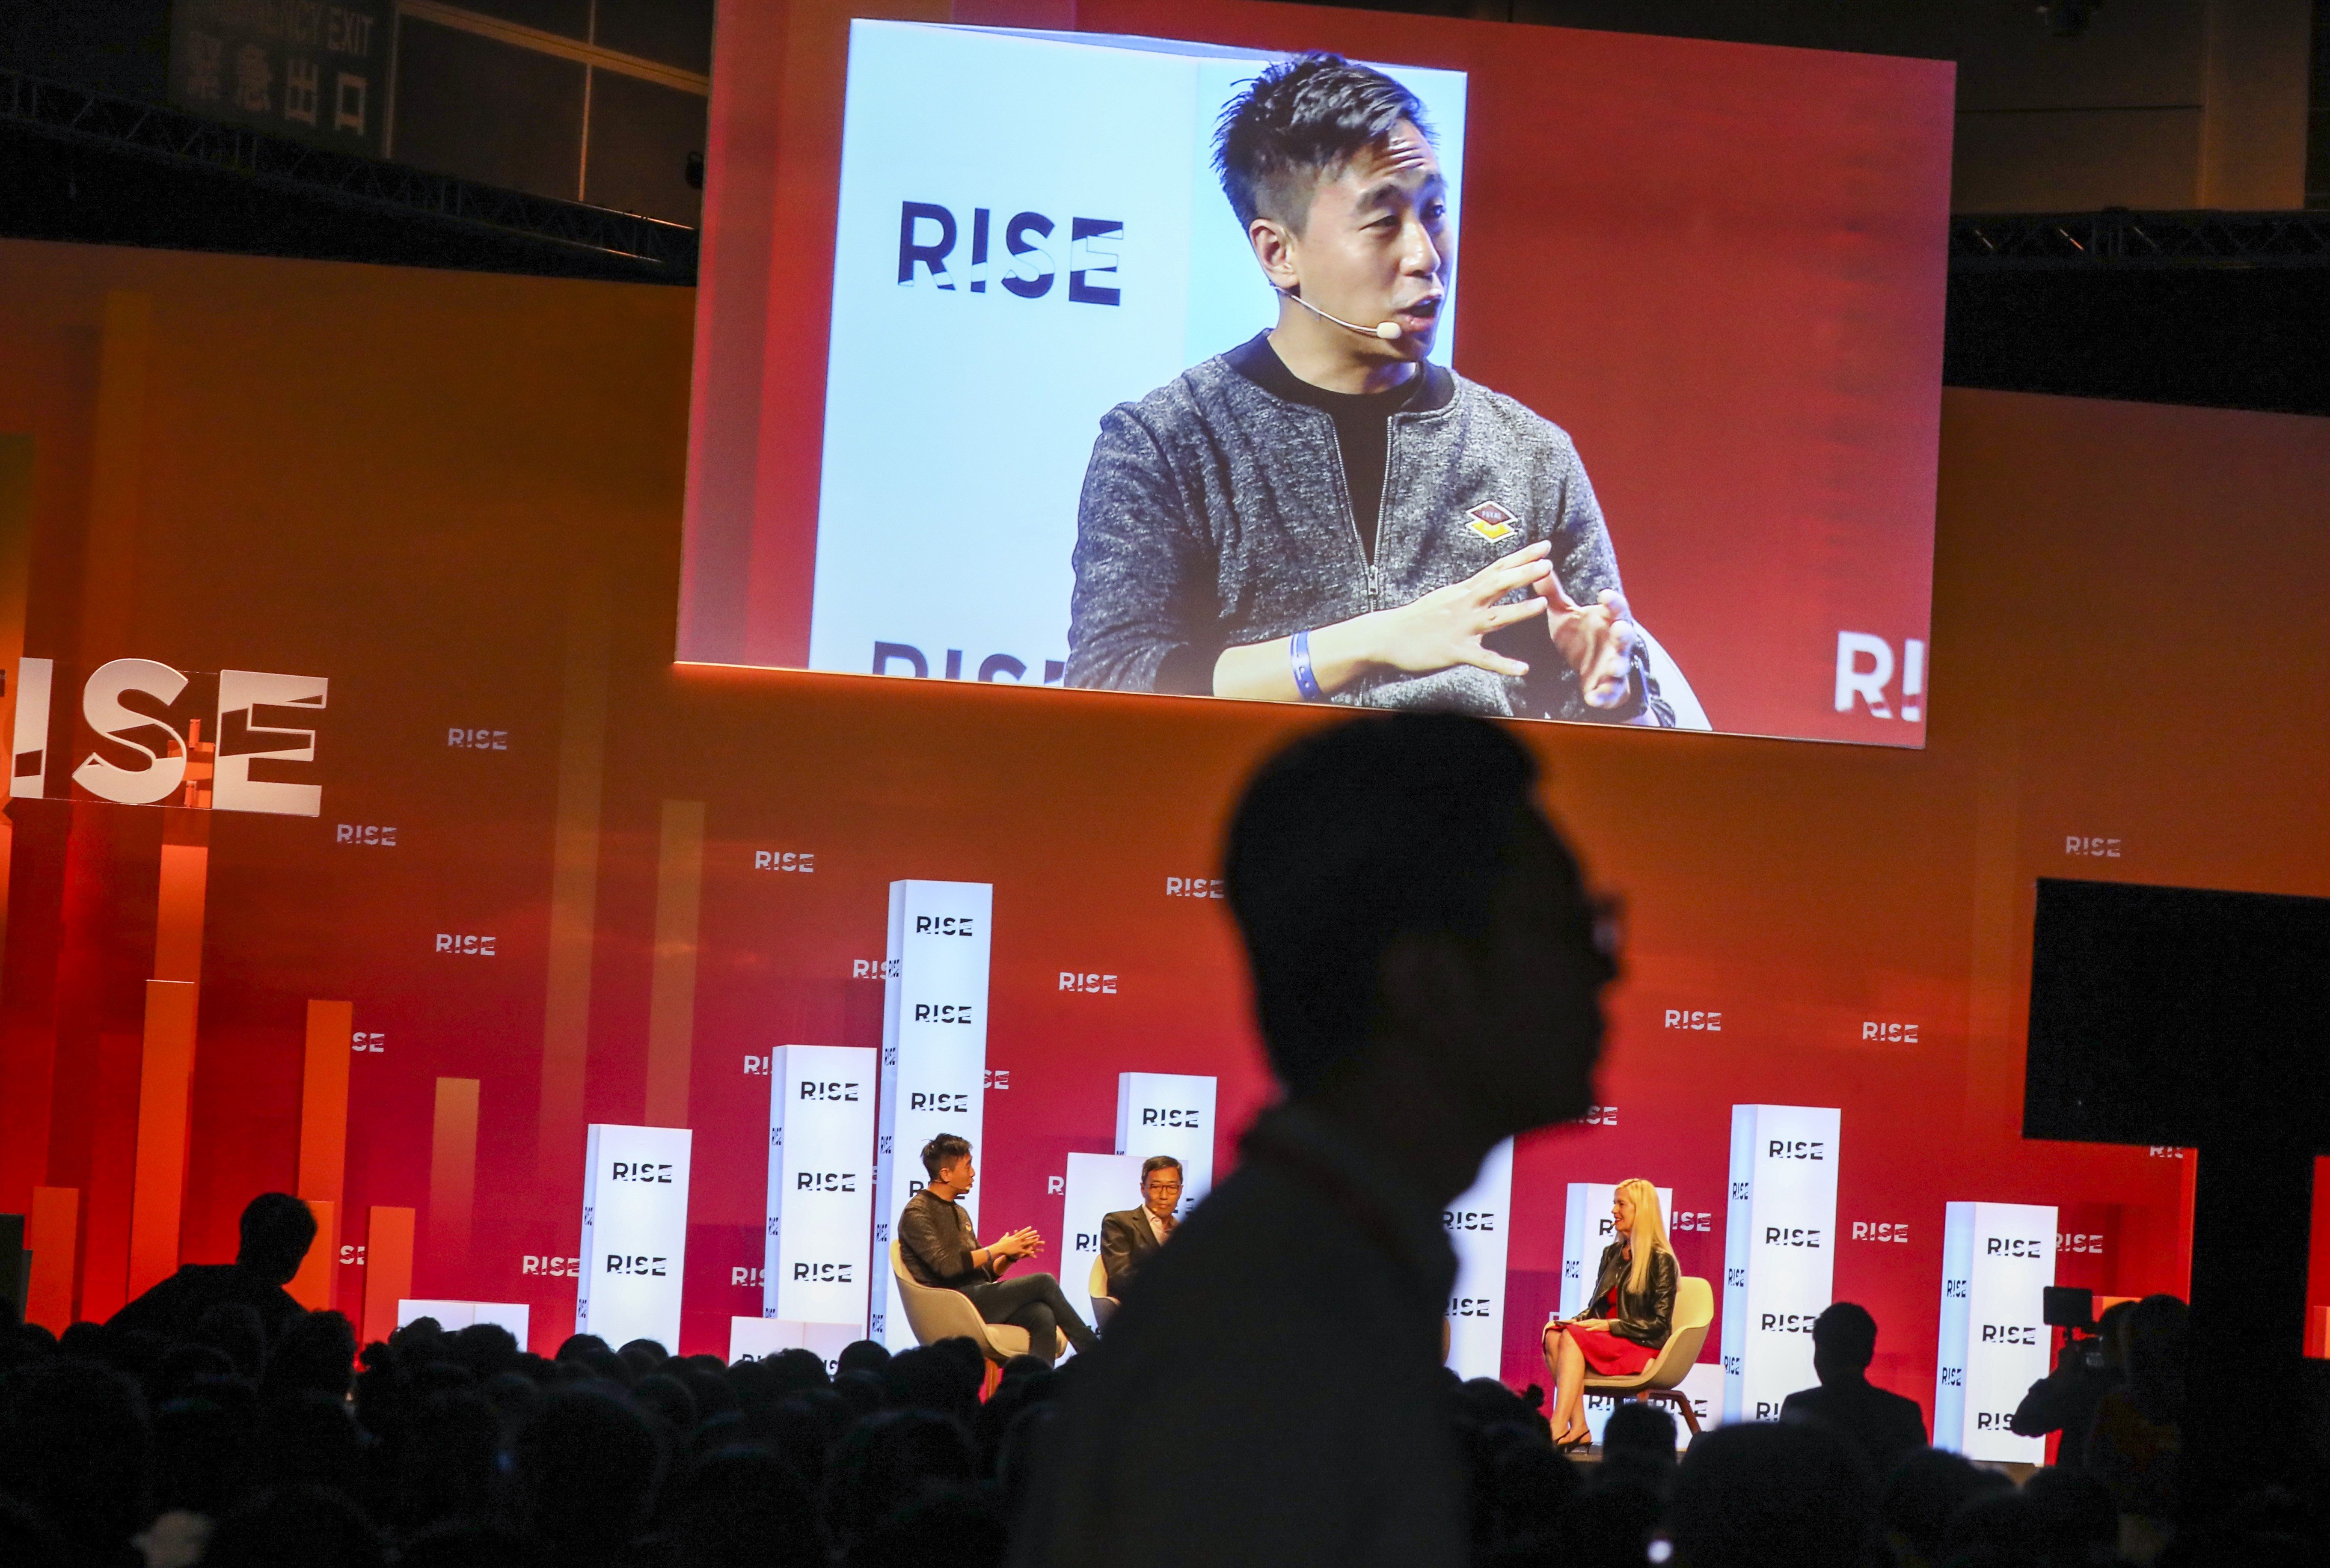 South China Morning Post CEO Gary Liu speaks at the RISE tech conference in Hong Kong on Tuesday. Photo: SCMP / Nora Tam